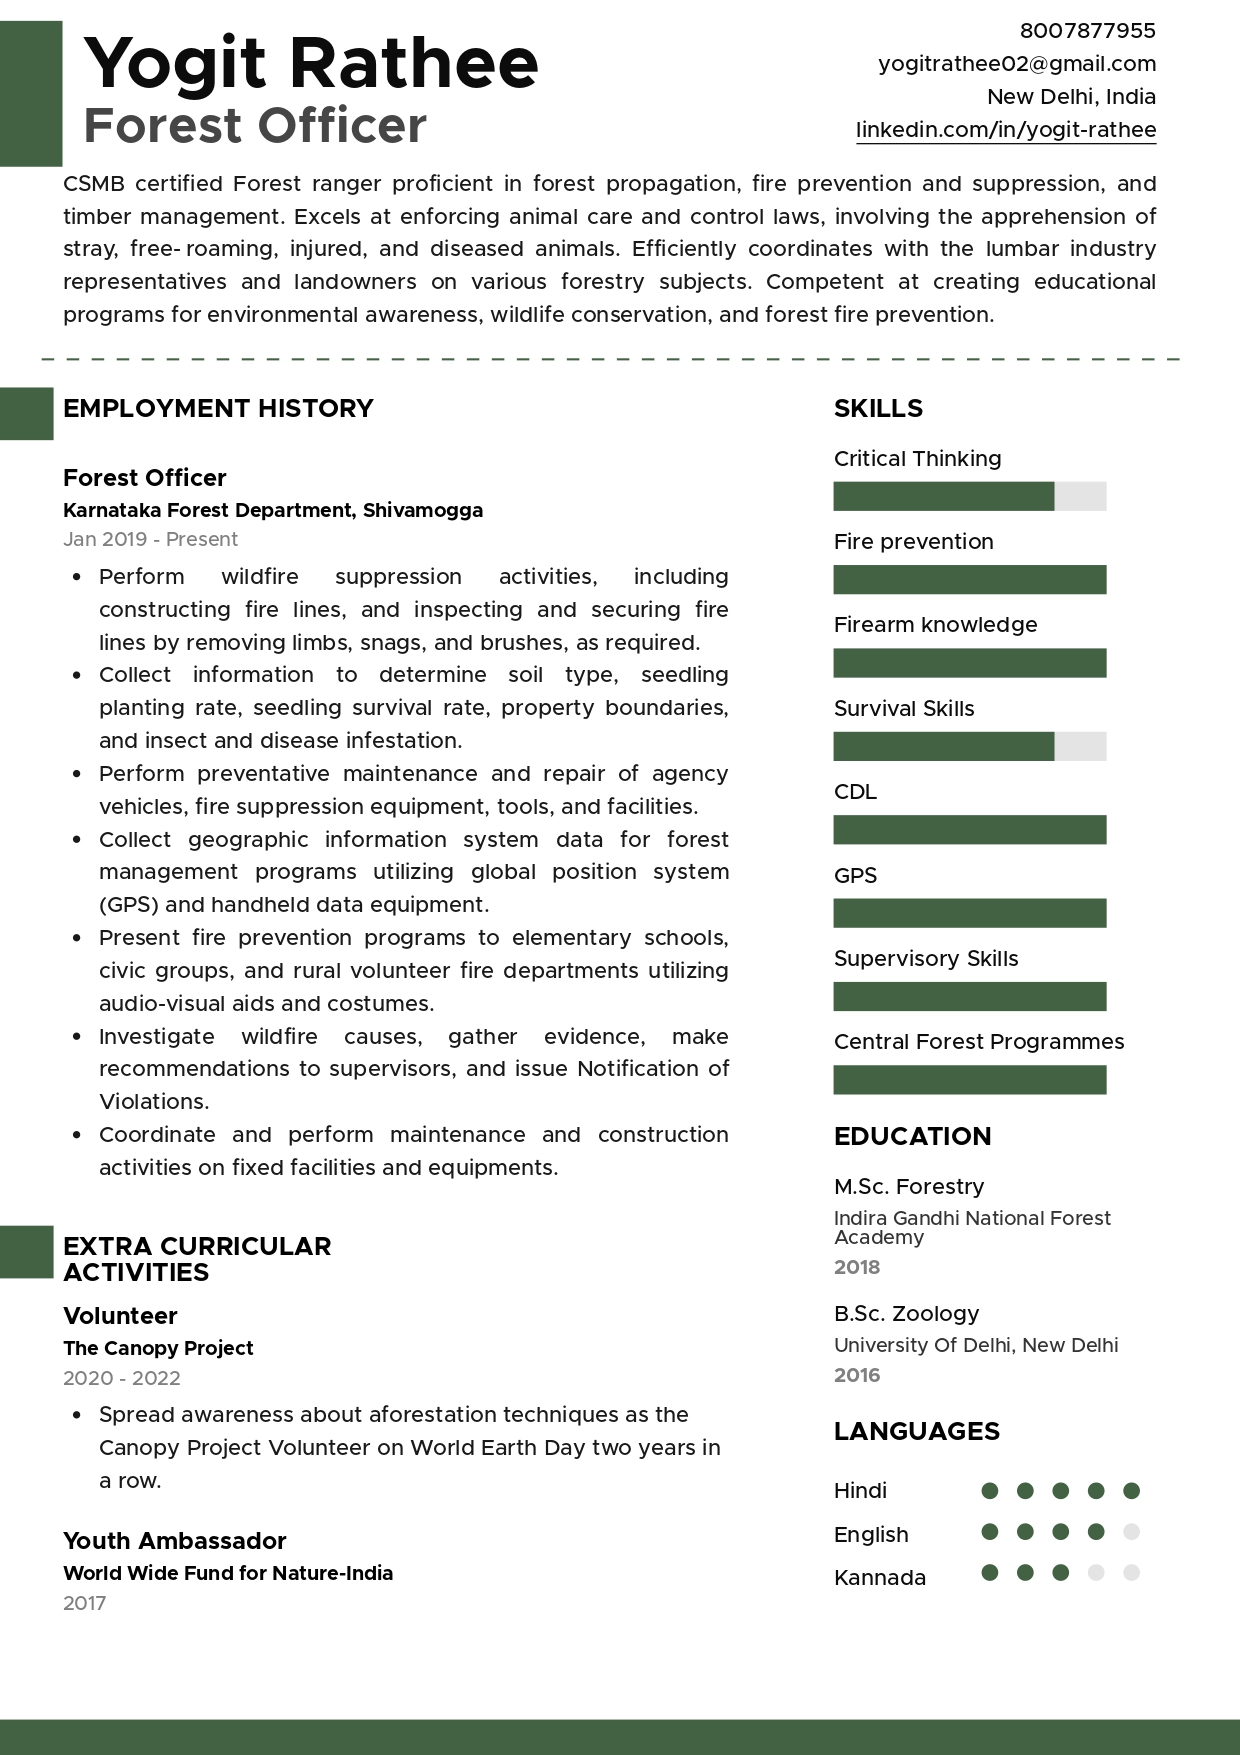 Sample Resume of Forest Officer | Free Resume Templates & Samples on Resumod.co